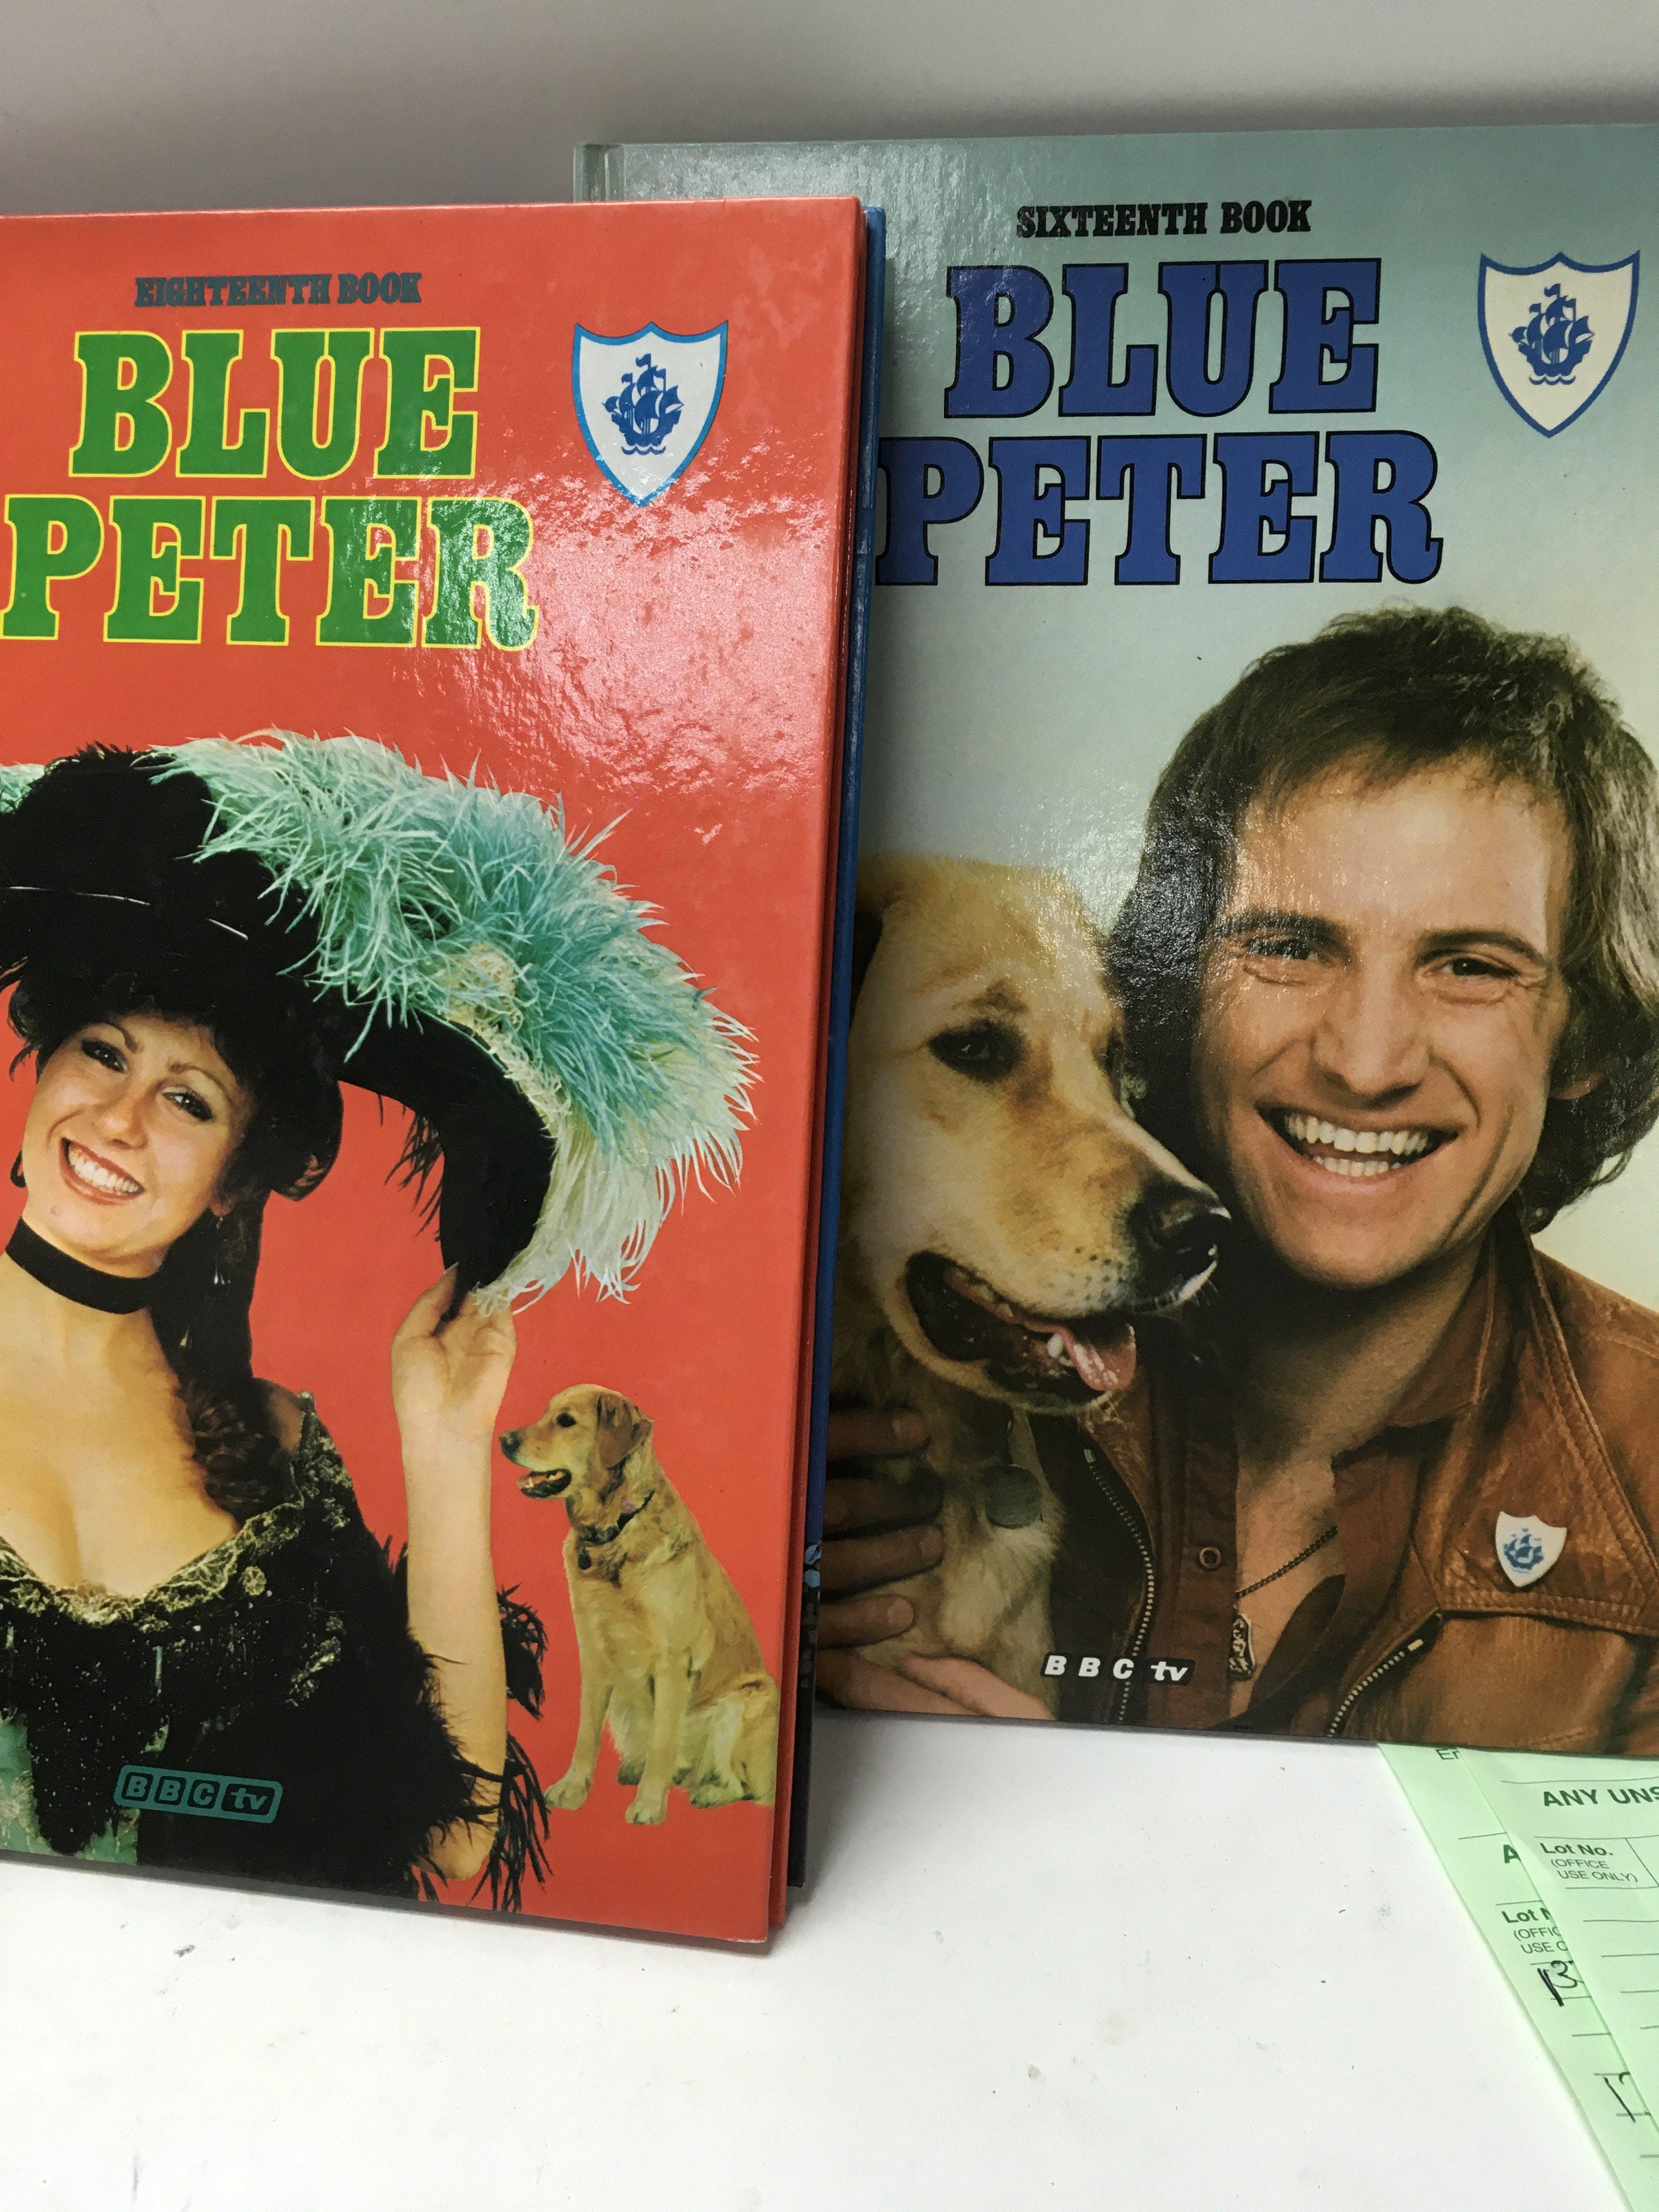 No Reserve: A collection of blue peter albums.